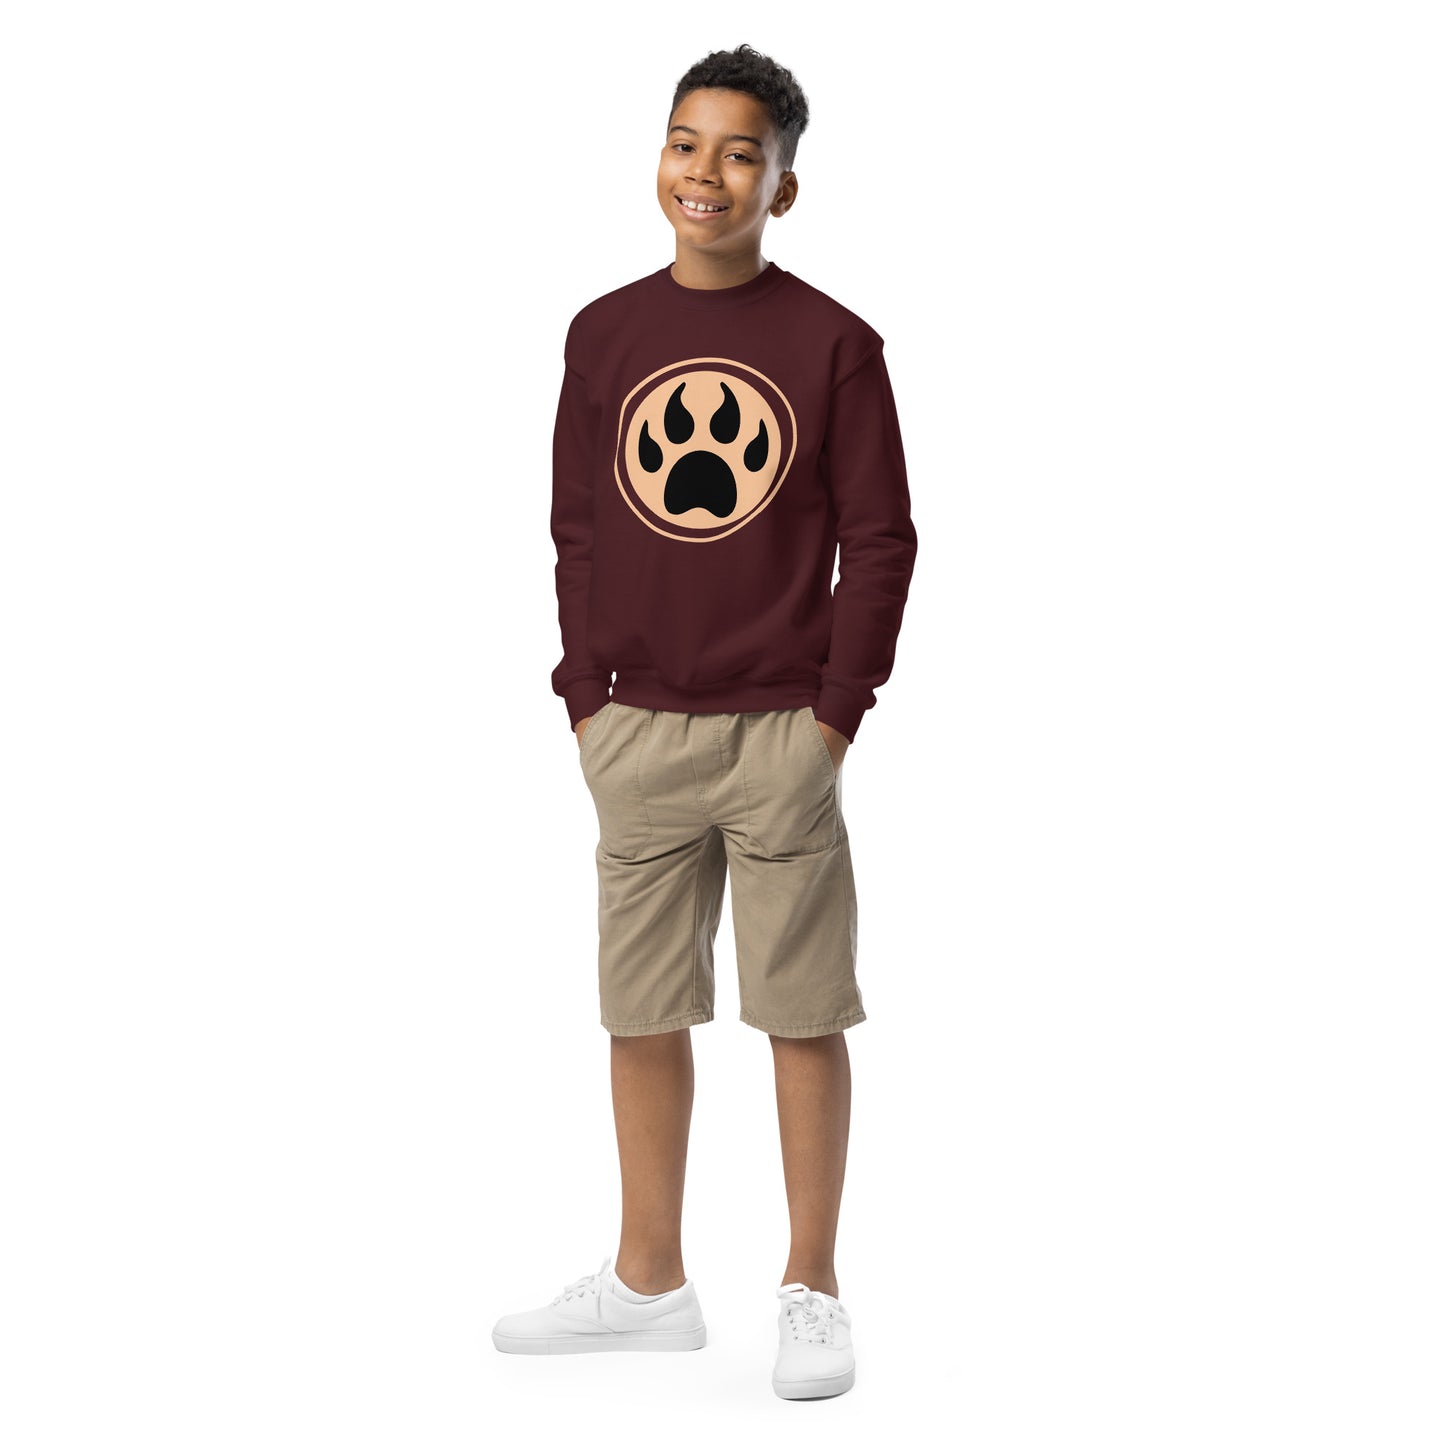 Youth with maroon sweatshirt and a print of a wolf claw